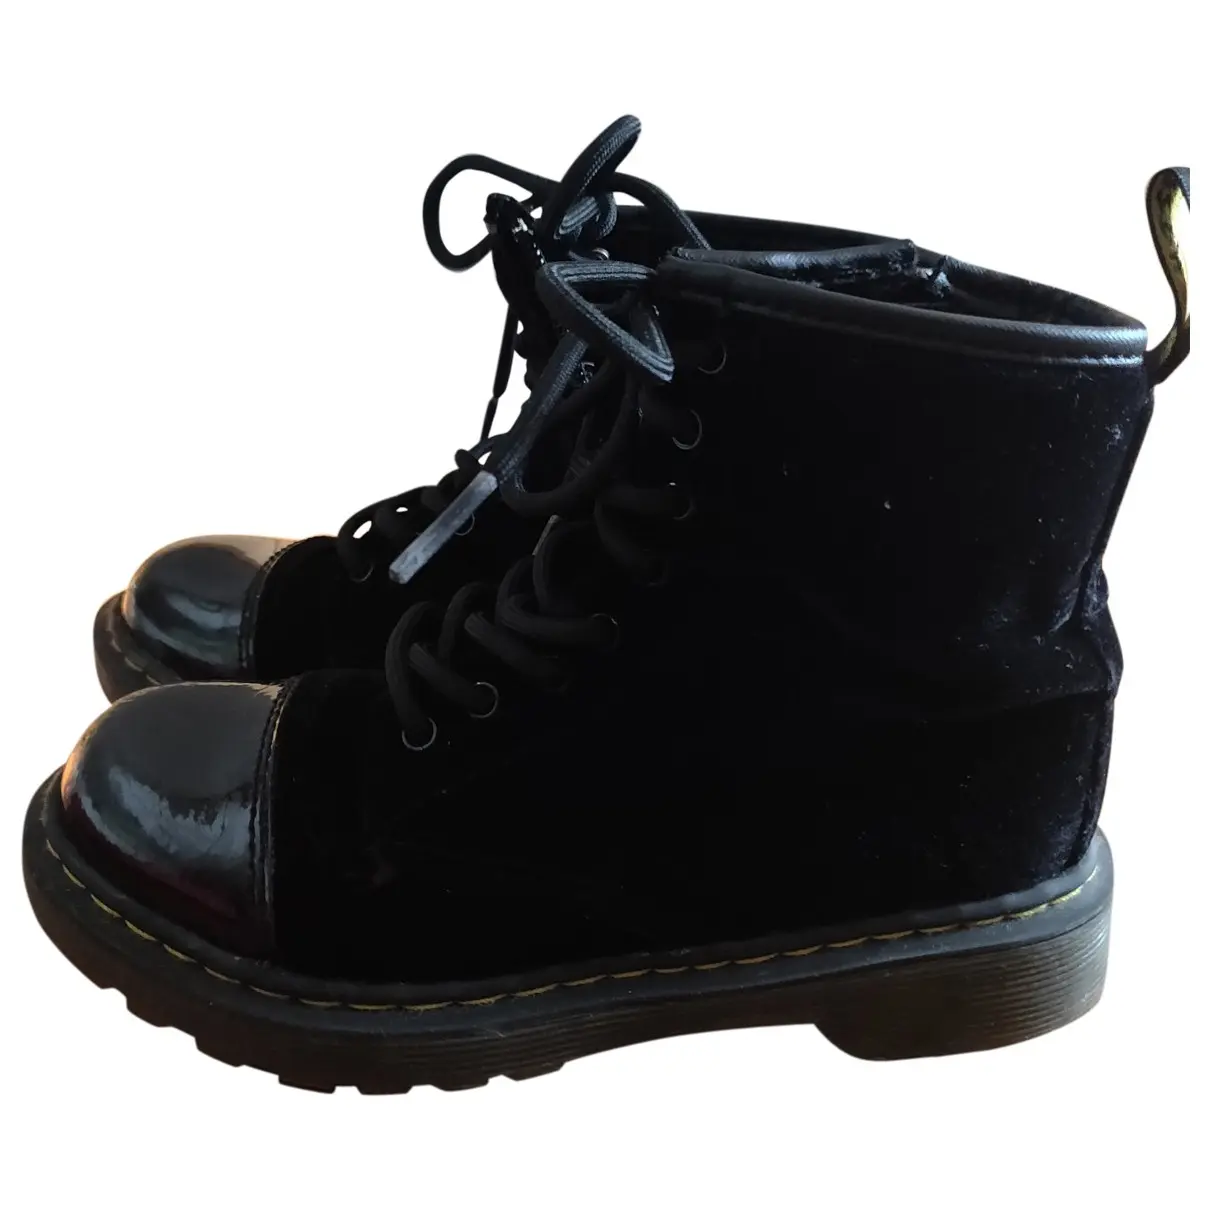 Patent leather boots Dr. Martens